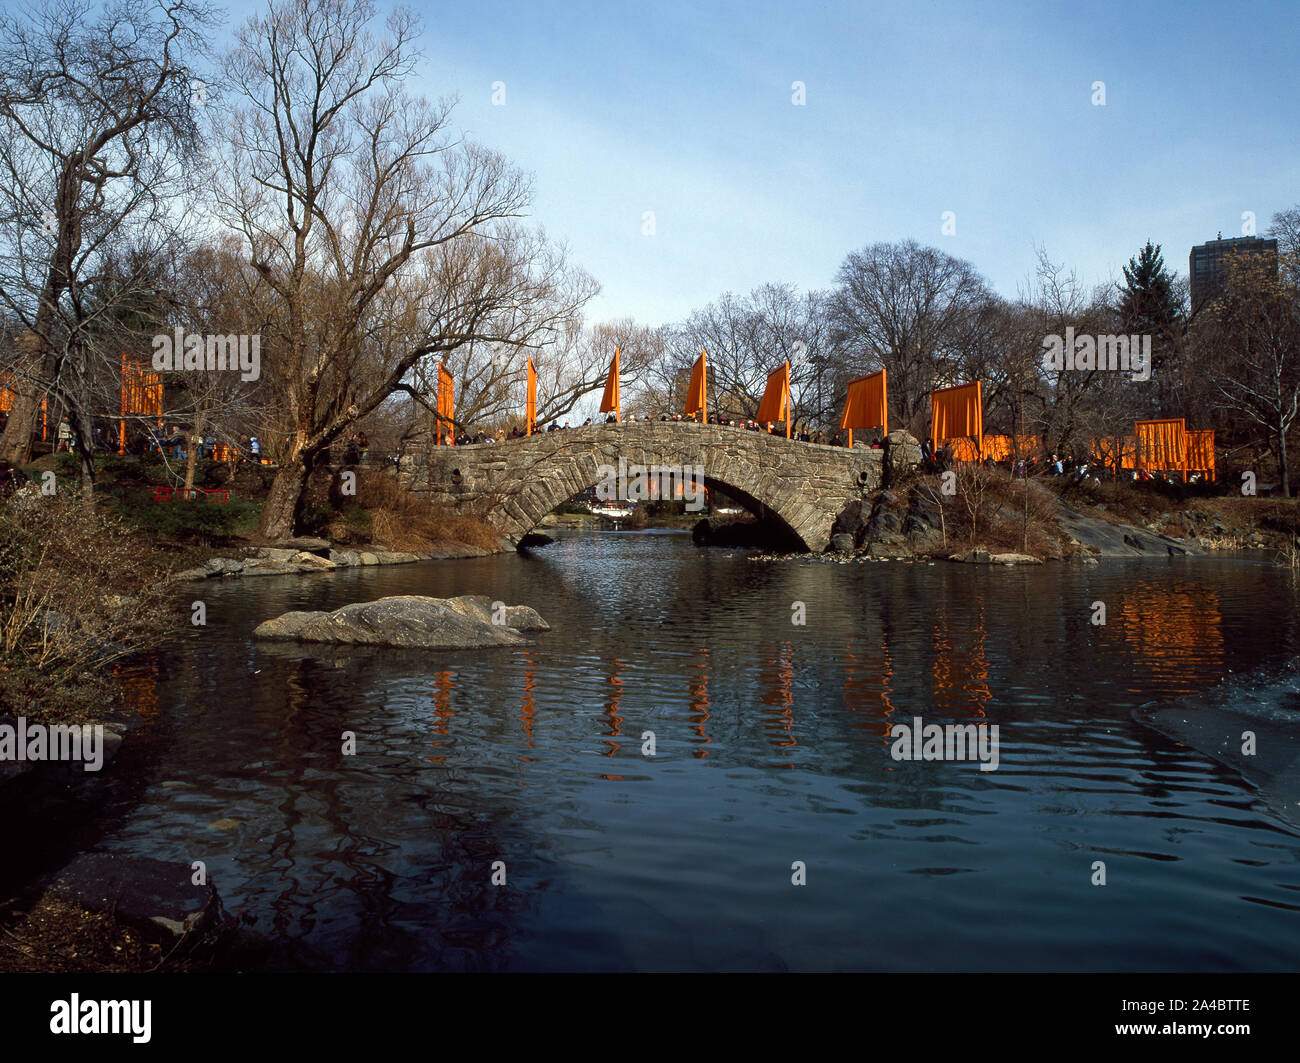 The Gates, a site-specific work of art by Christo and Jeanne-Claude in Central Park, New York City Stock Photo